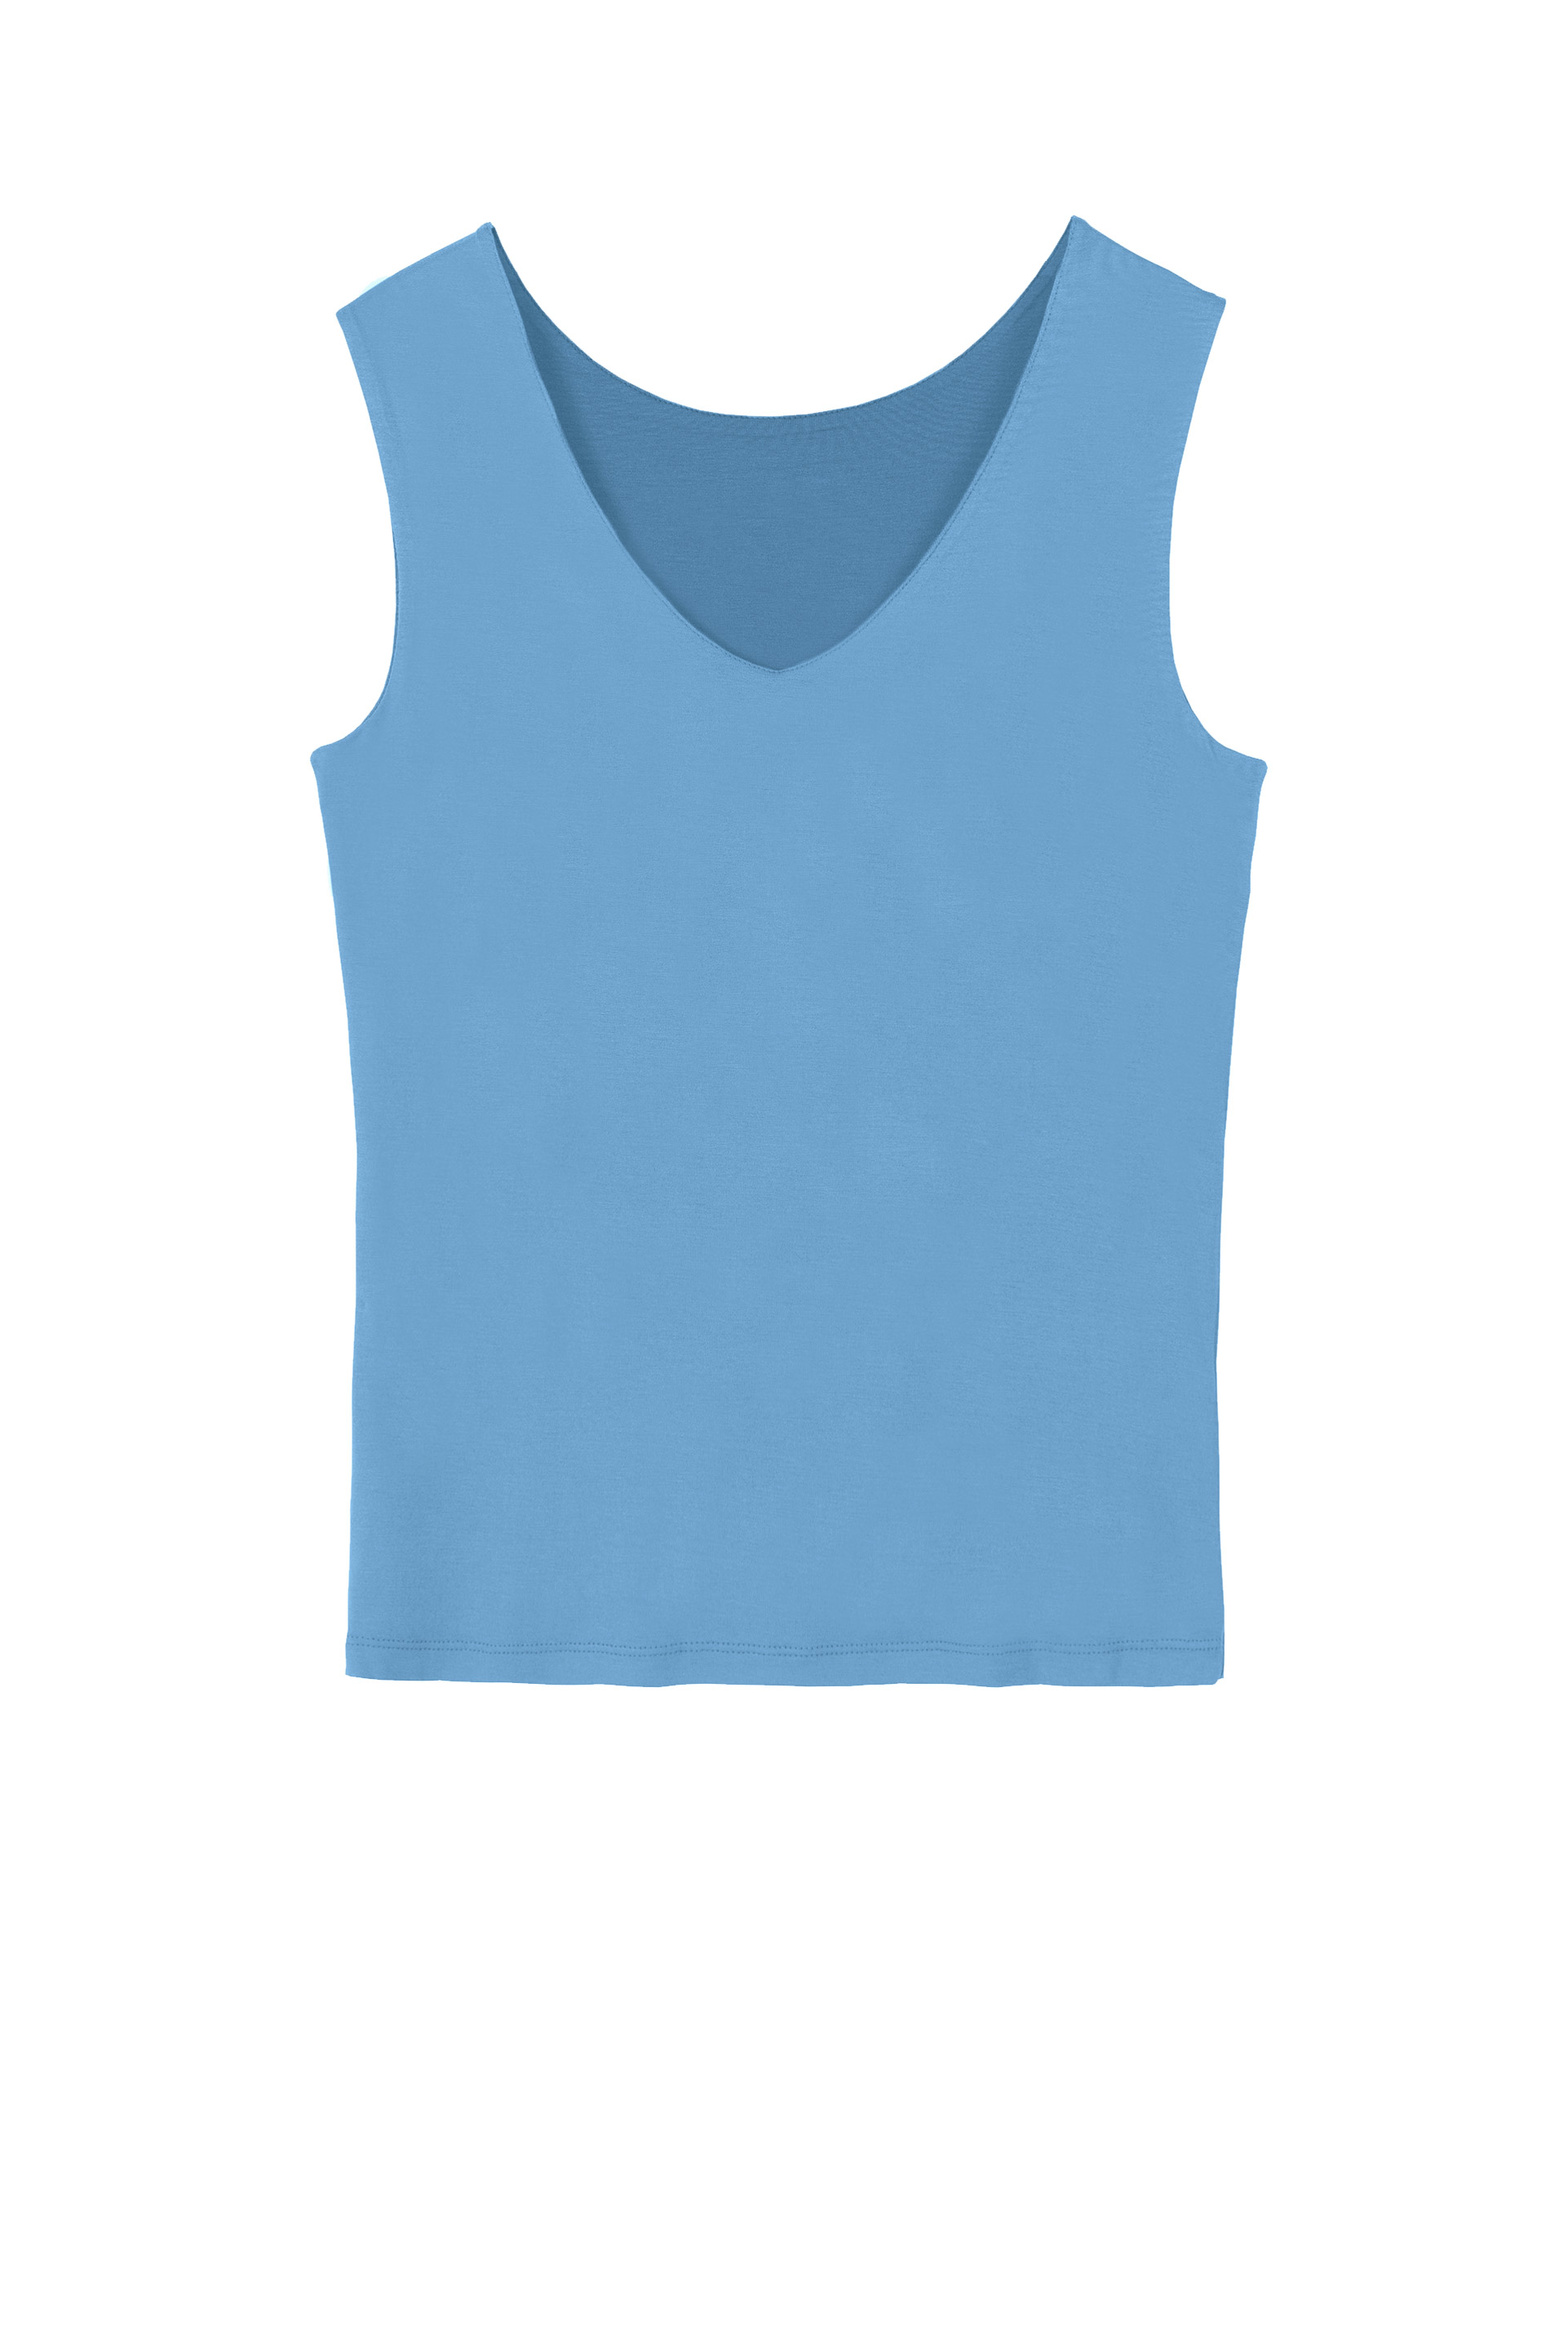 97800-sleeveless_two_way_top_french_blue.jpg